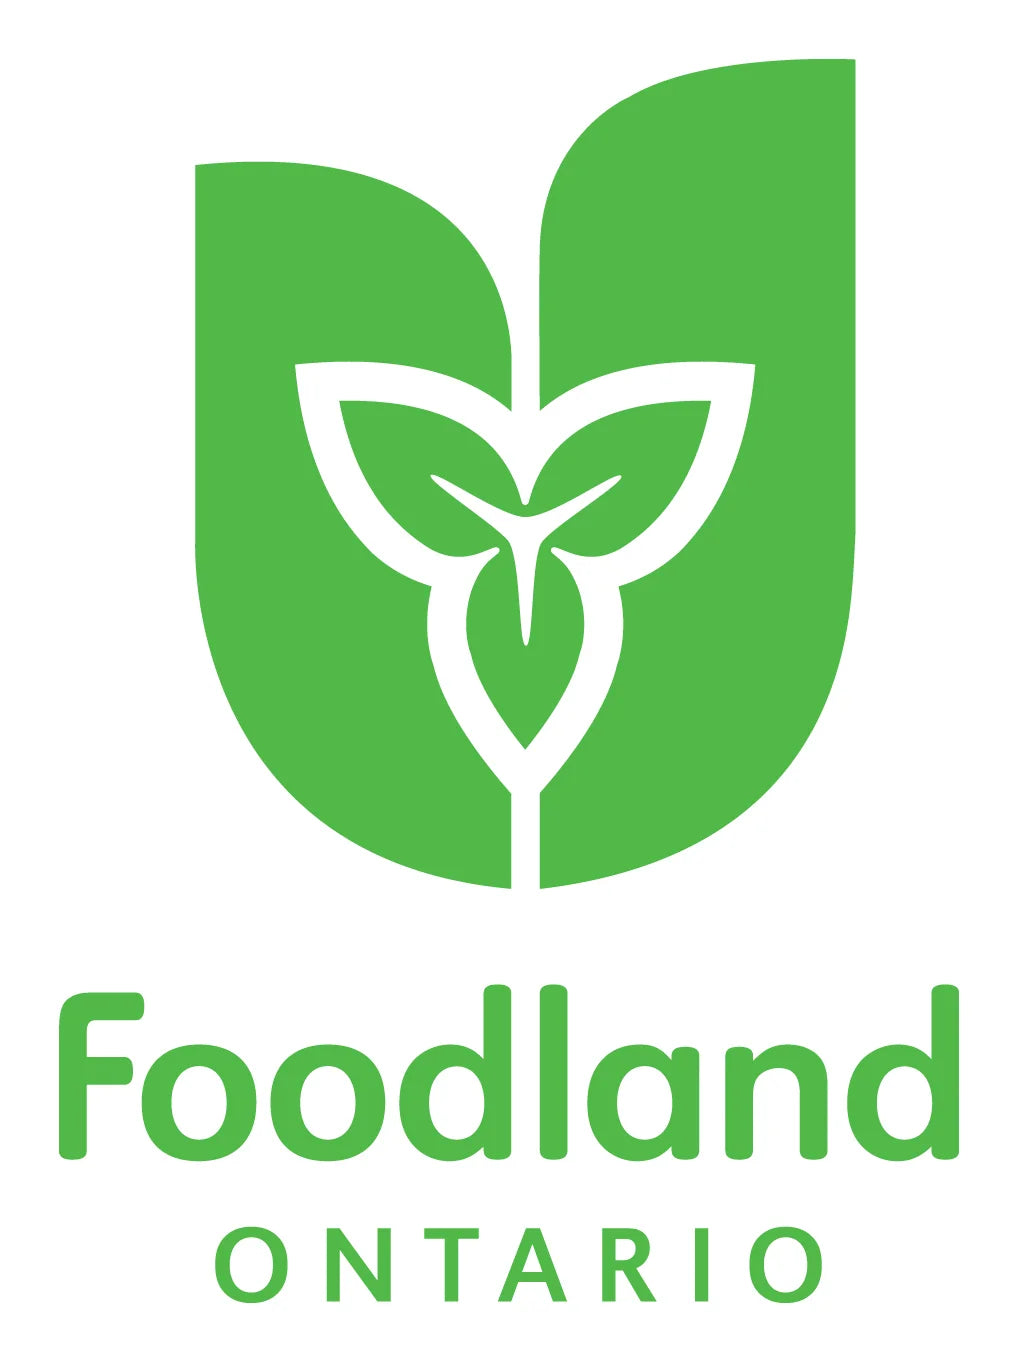 Partnered with Foodland Ontario